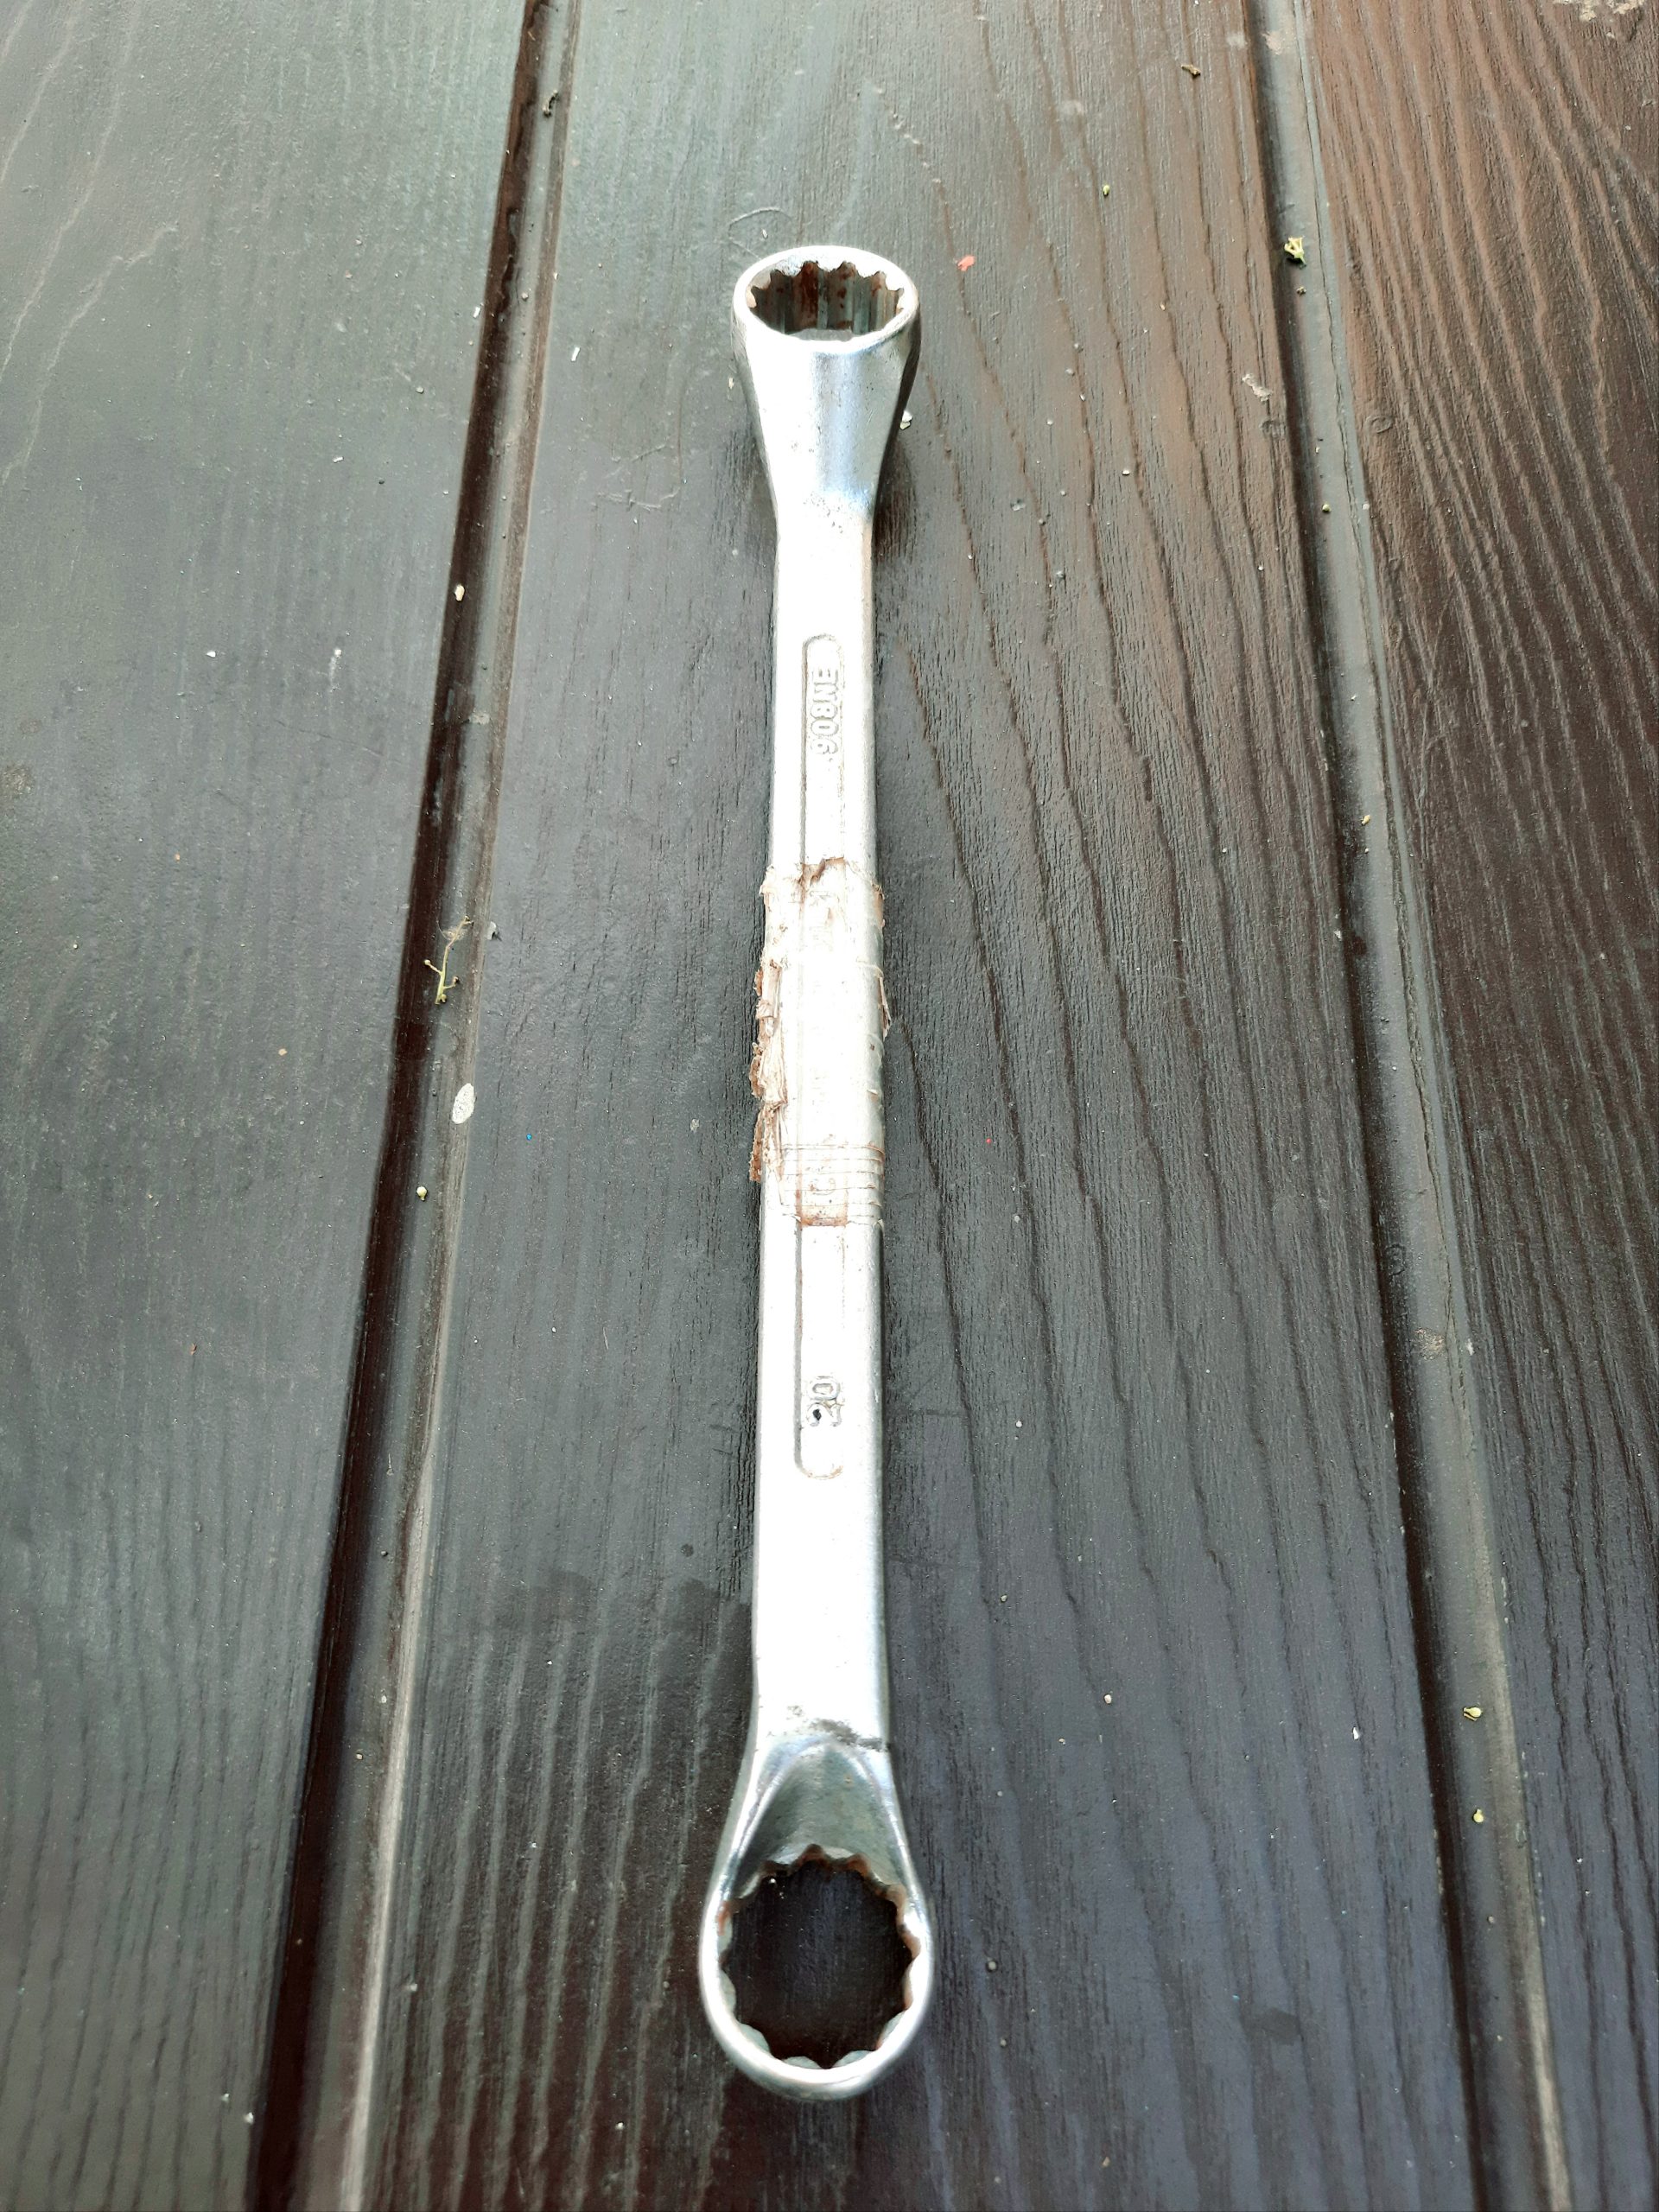 A ring spanner